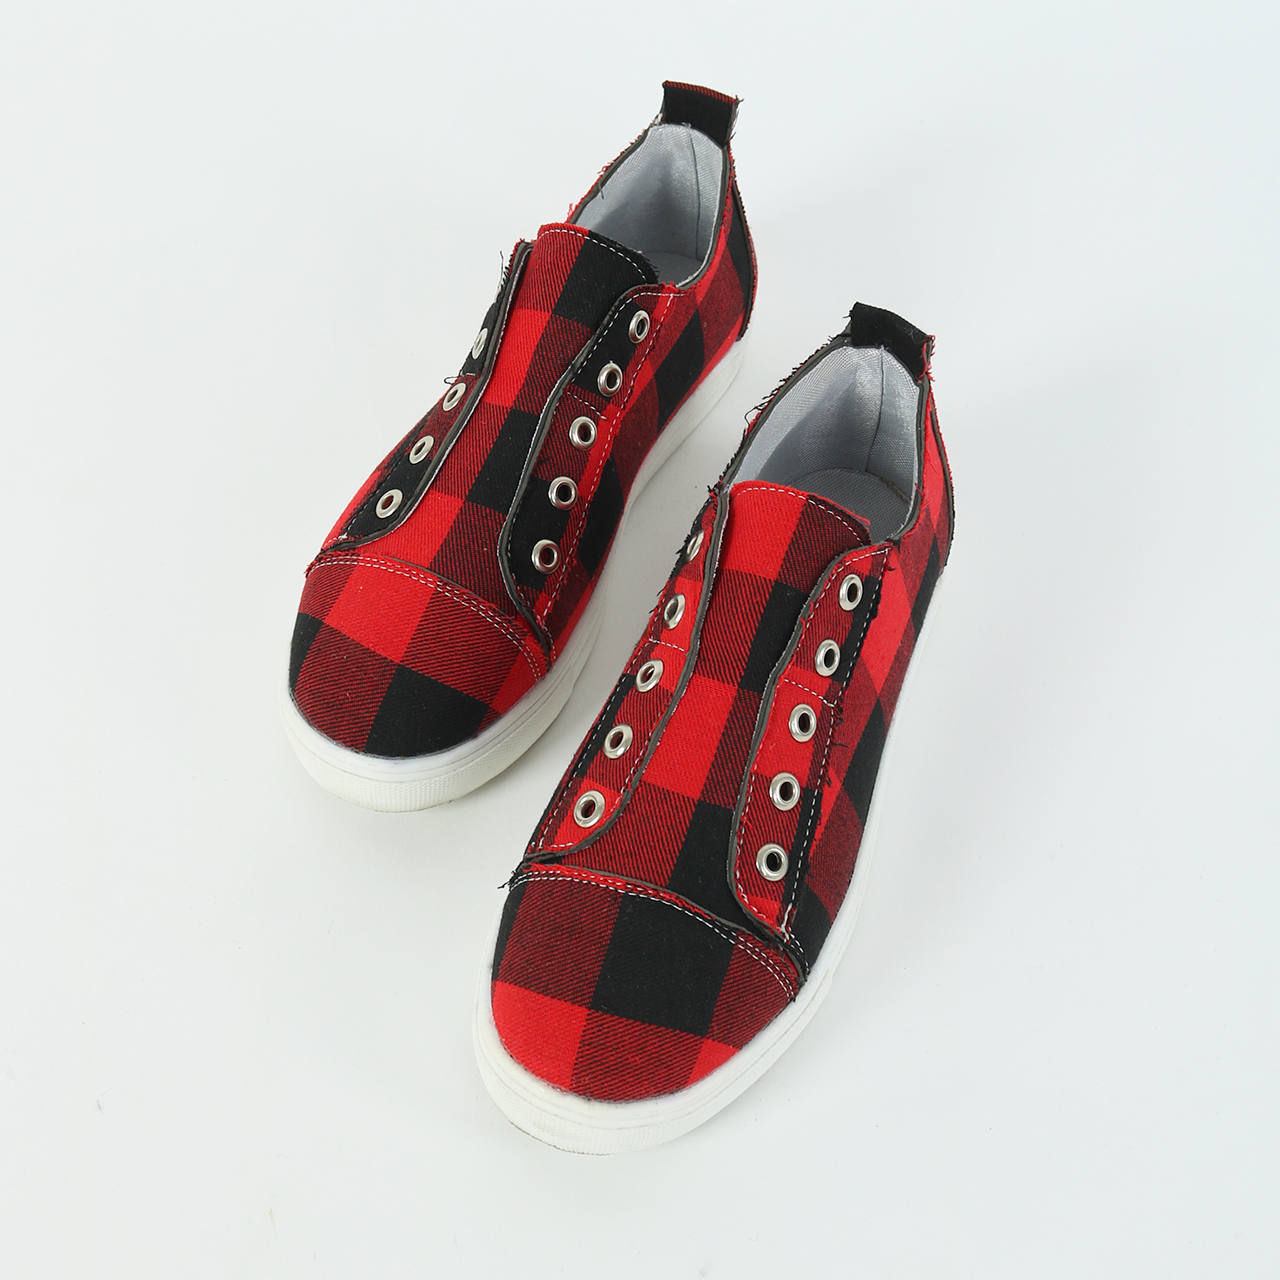 Plaid Slip-On Round Toe Flat Sneakers [2020 New Arrival]